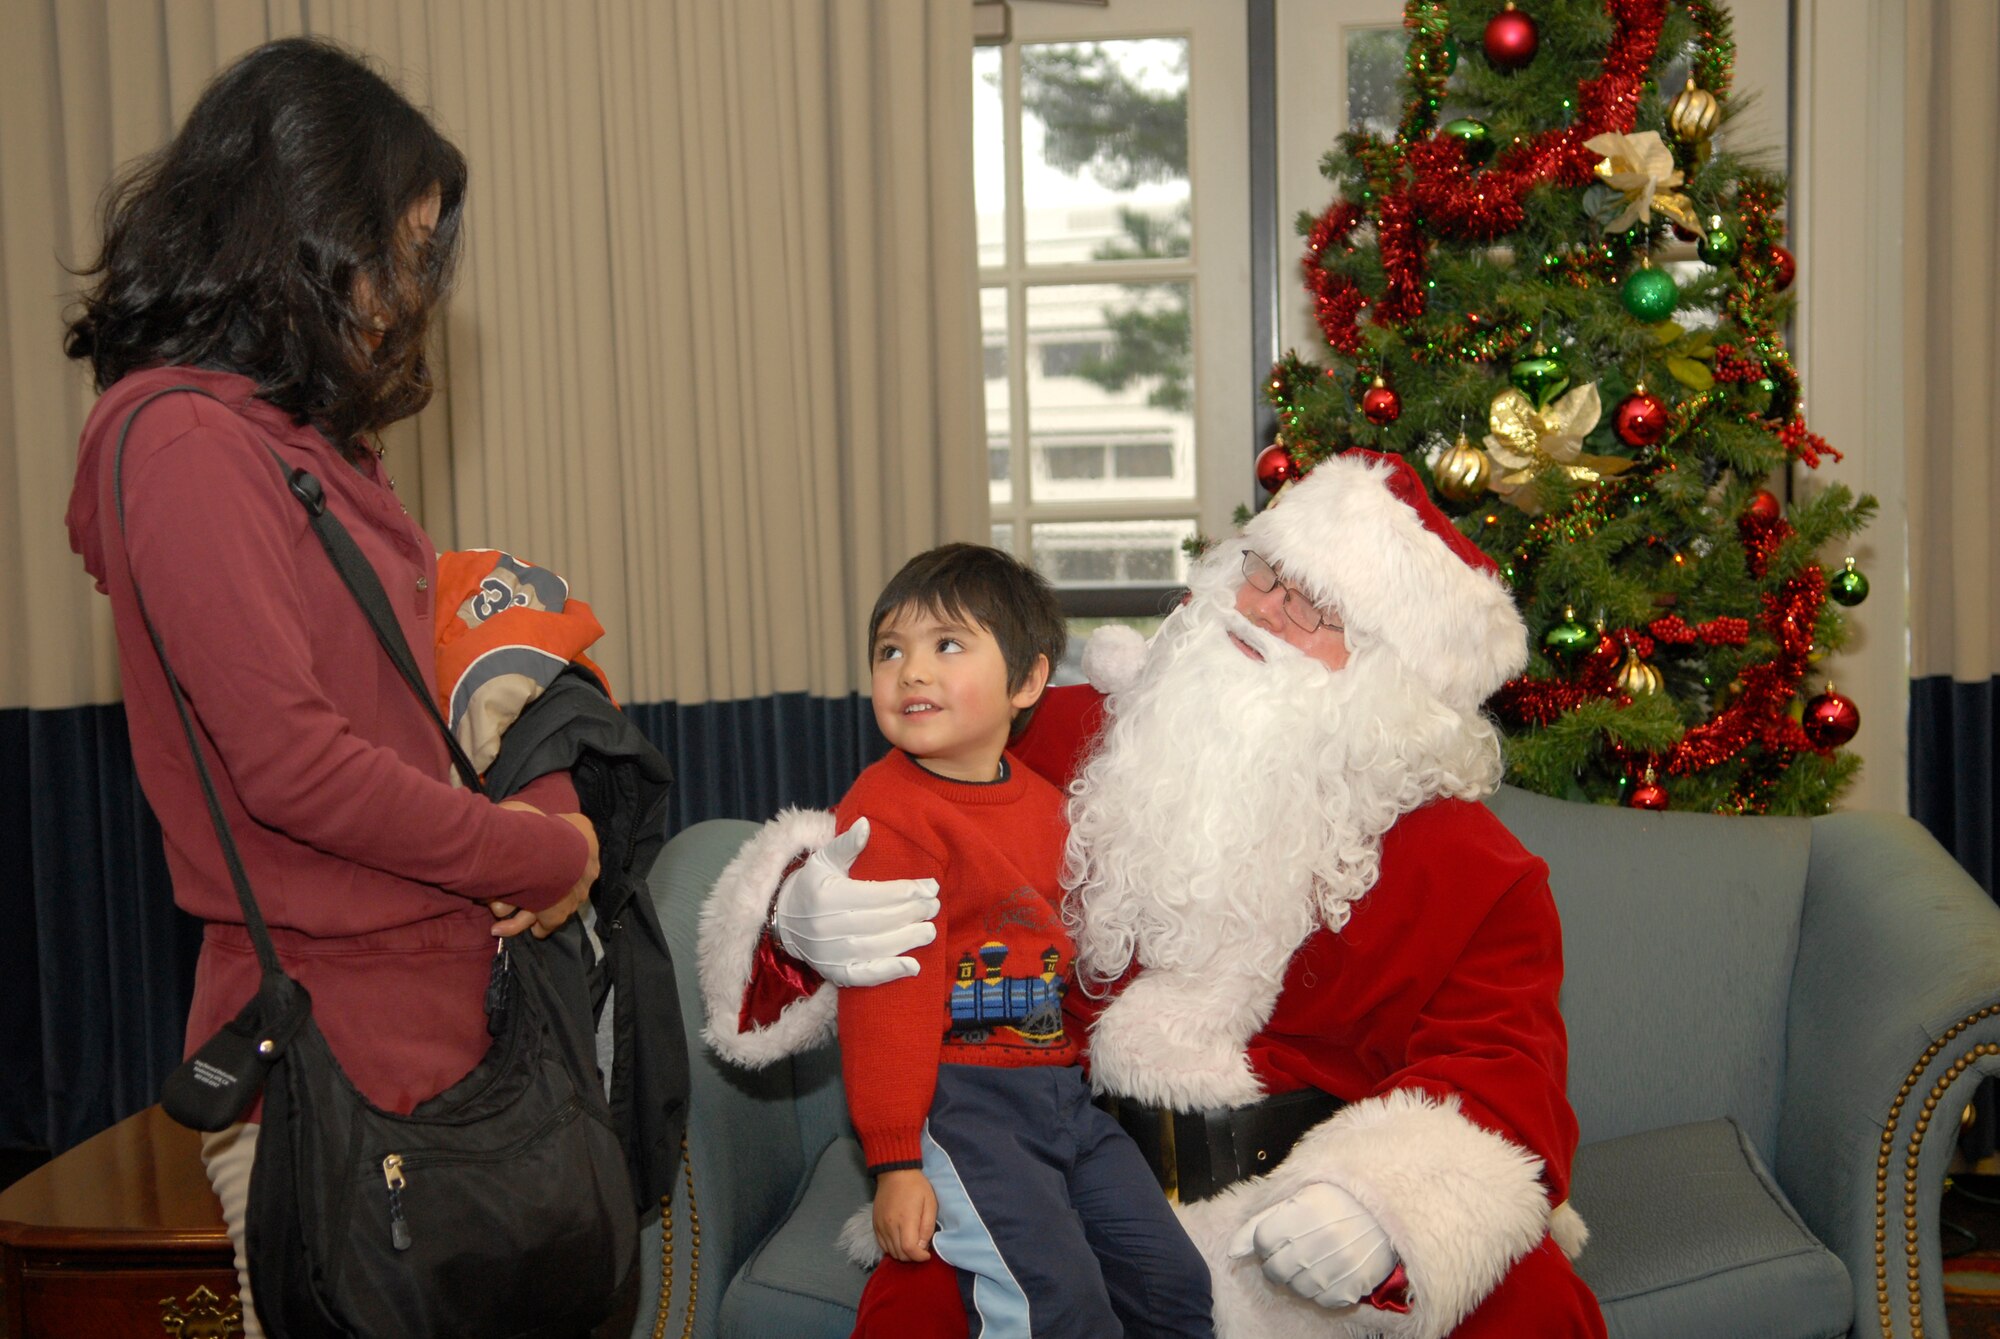 VANDENBERG AIR FORCE BASE, Calif. -- Taiga Ross gives his Christmas wish to Santa at the Pacific Coast Club during the Breakfast With Santa event here Saturday, Dec. 18, 2010.  Team V families celebrated the holidays with breakfast, crafts and games.  (U.S. Air Force photo/Senior Airman Andrew Satran) 

  